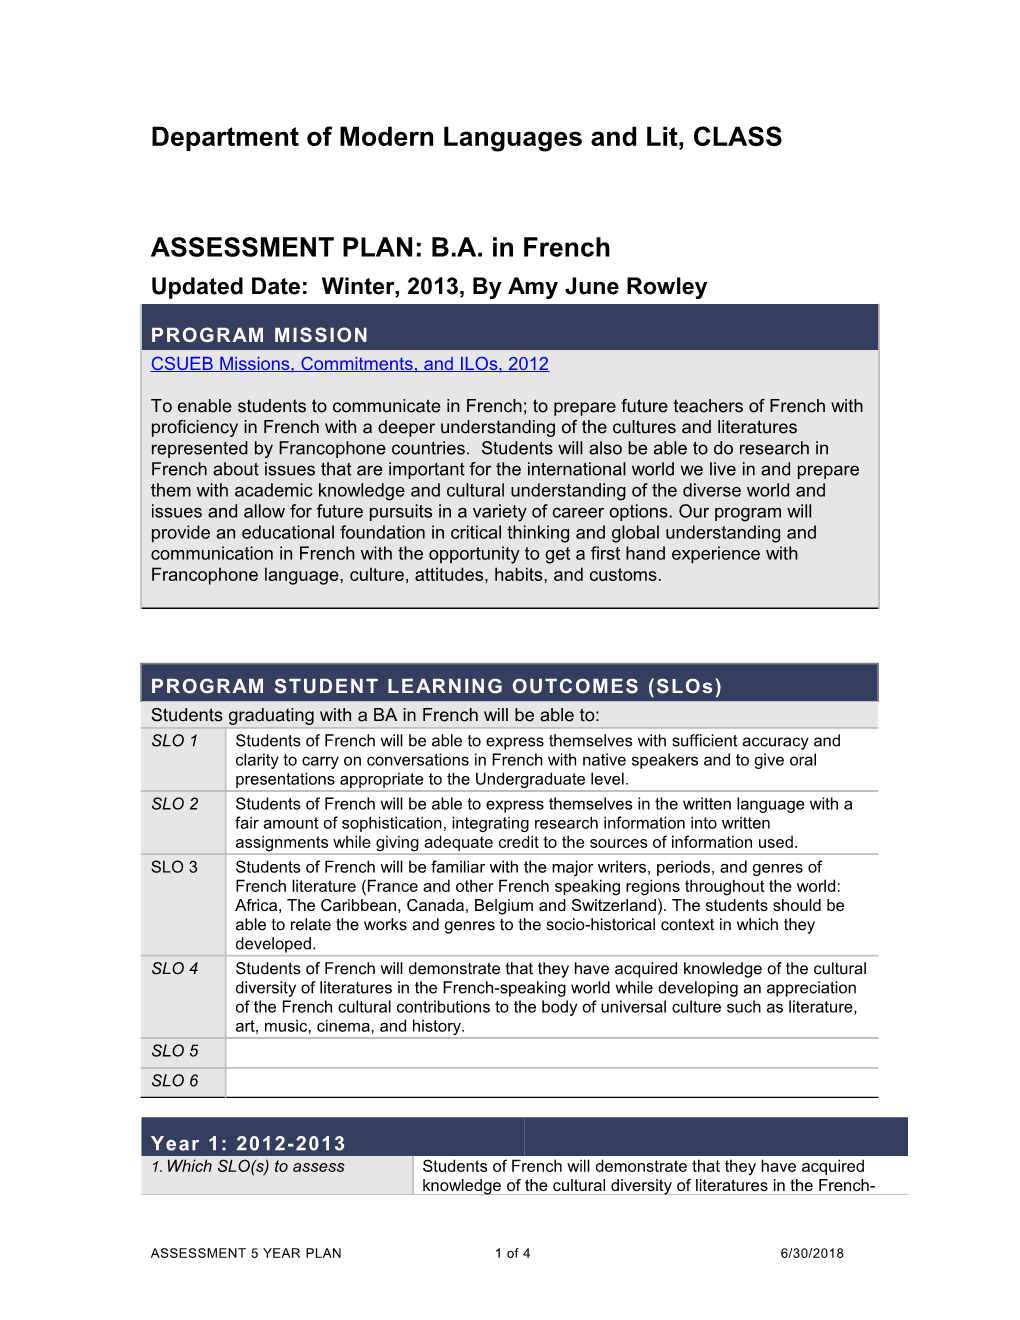 ASSESSMENT PLAN: B.A. in French